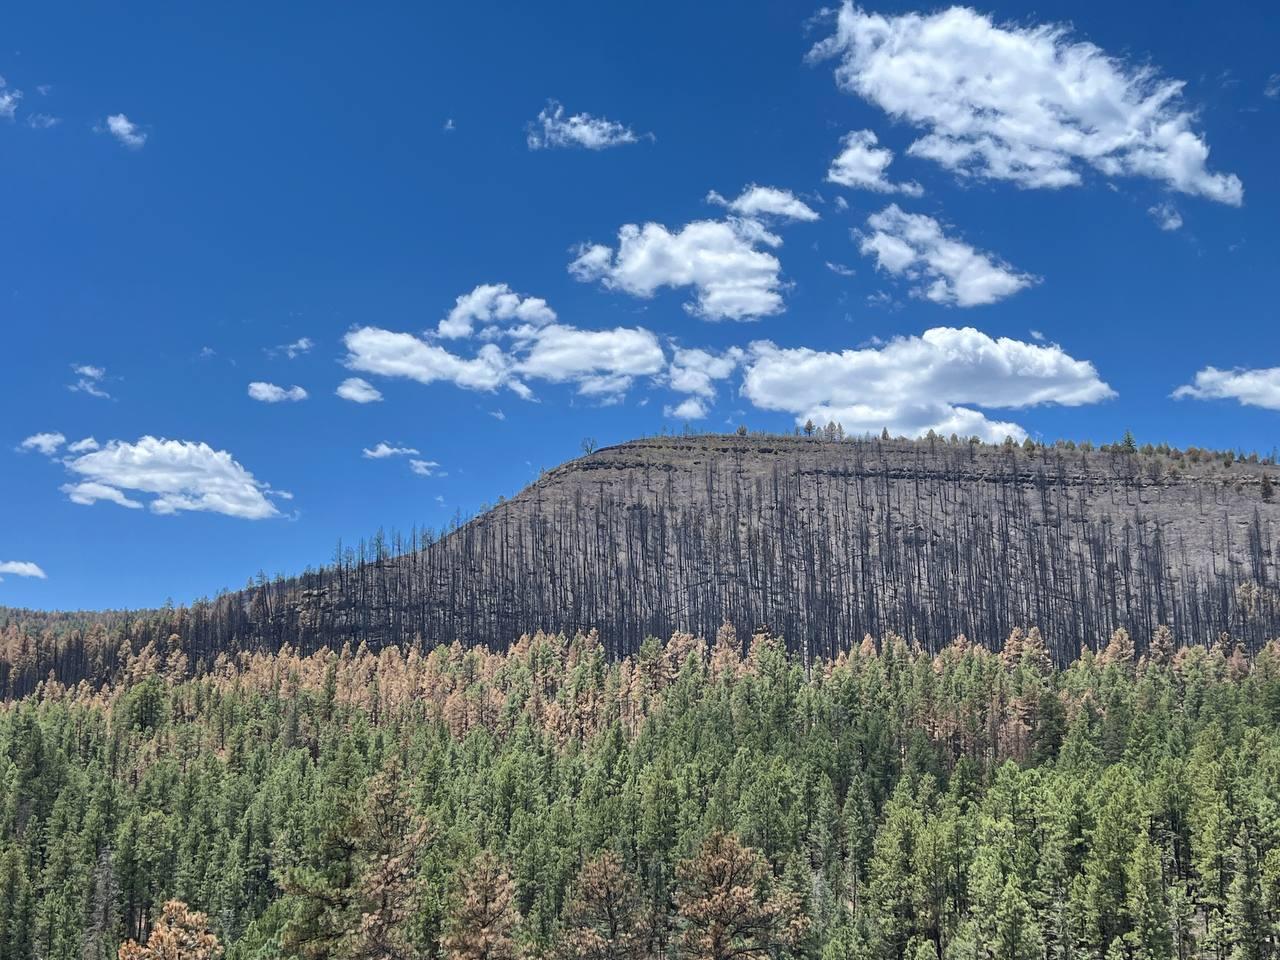 Landscape covered in trees with white clouds in blue sky. Trees at the bottom of image are green, trees in middle are a mix of brown and yellow. Trees on top section of ridge are burned completely to black trunks and black ground.